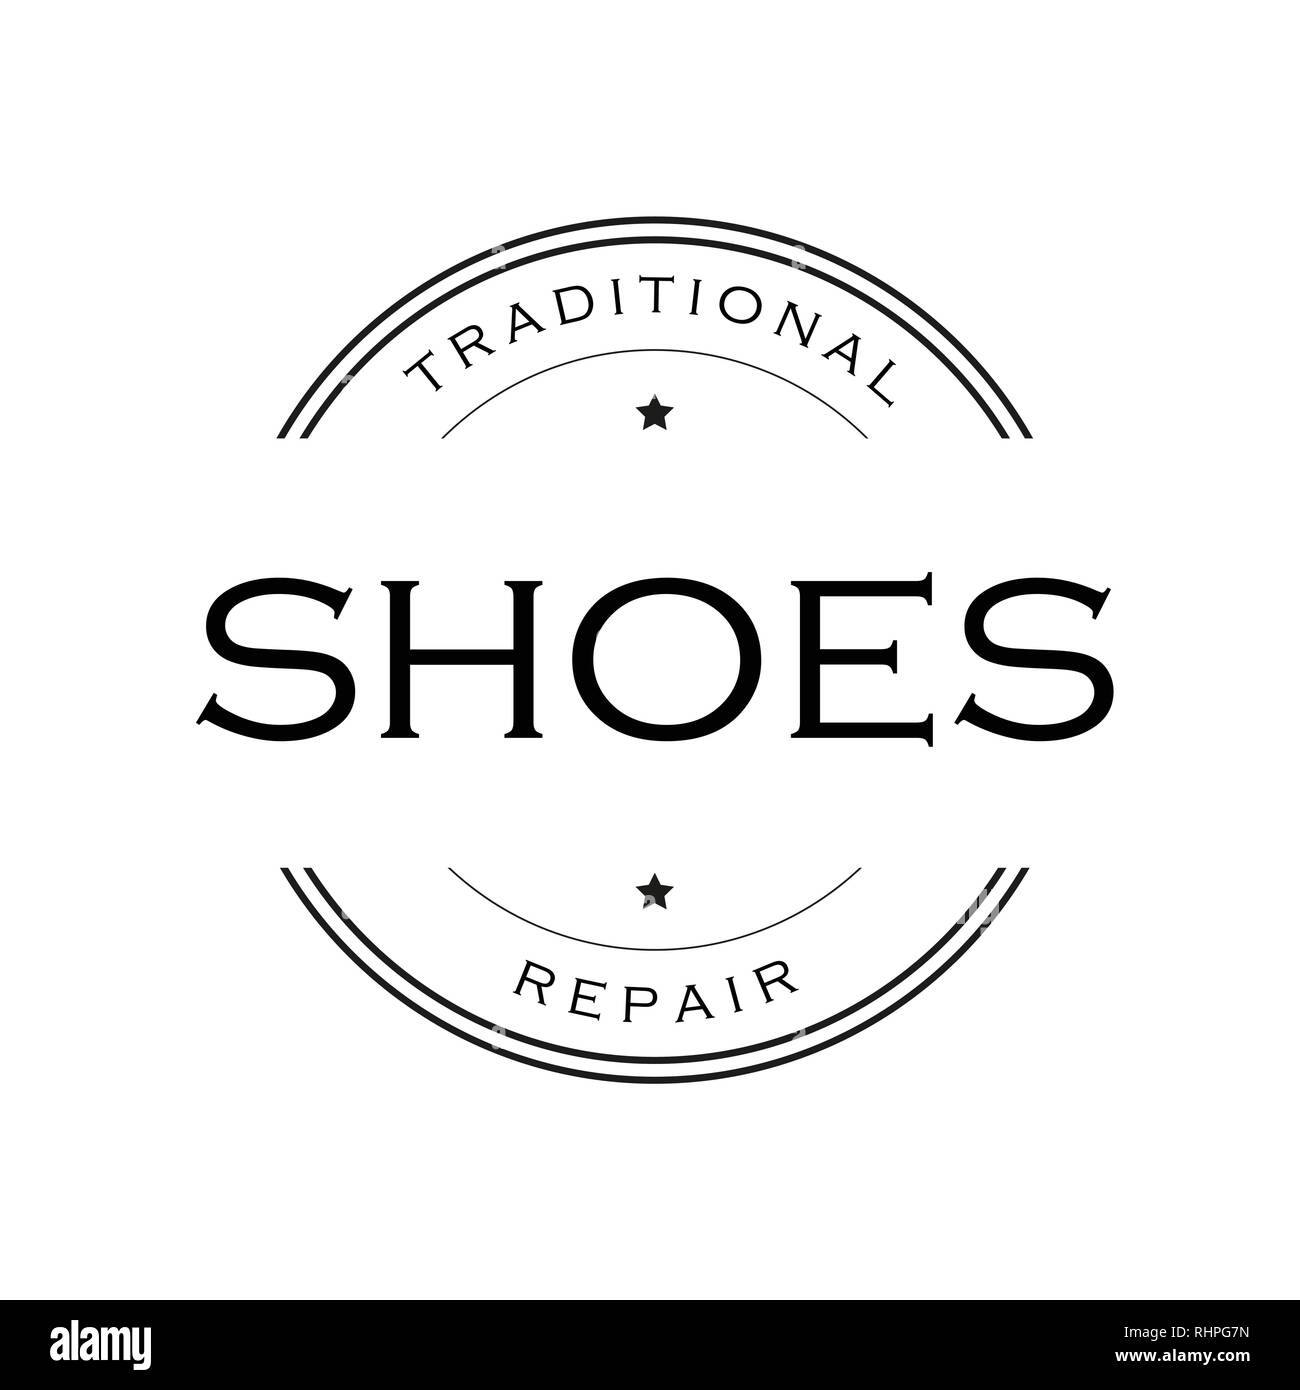 Shoes Repair vintage sign logo Stock Vector